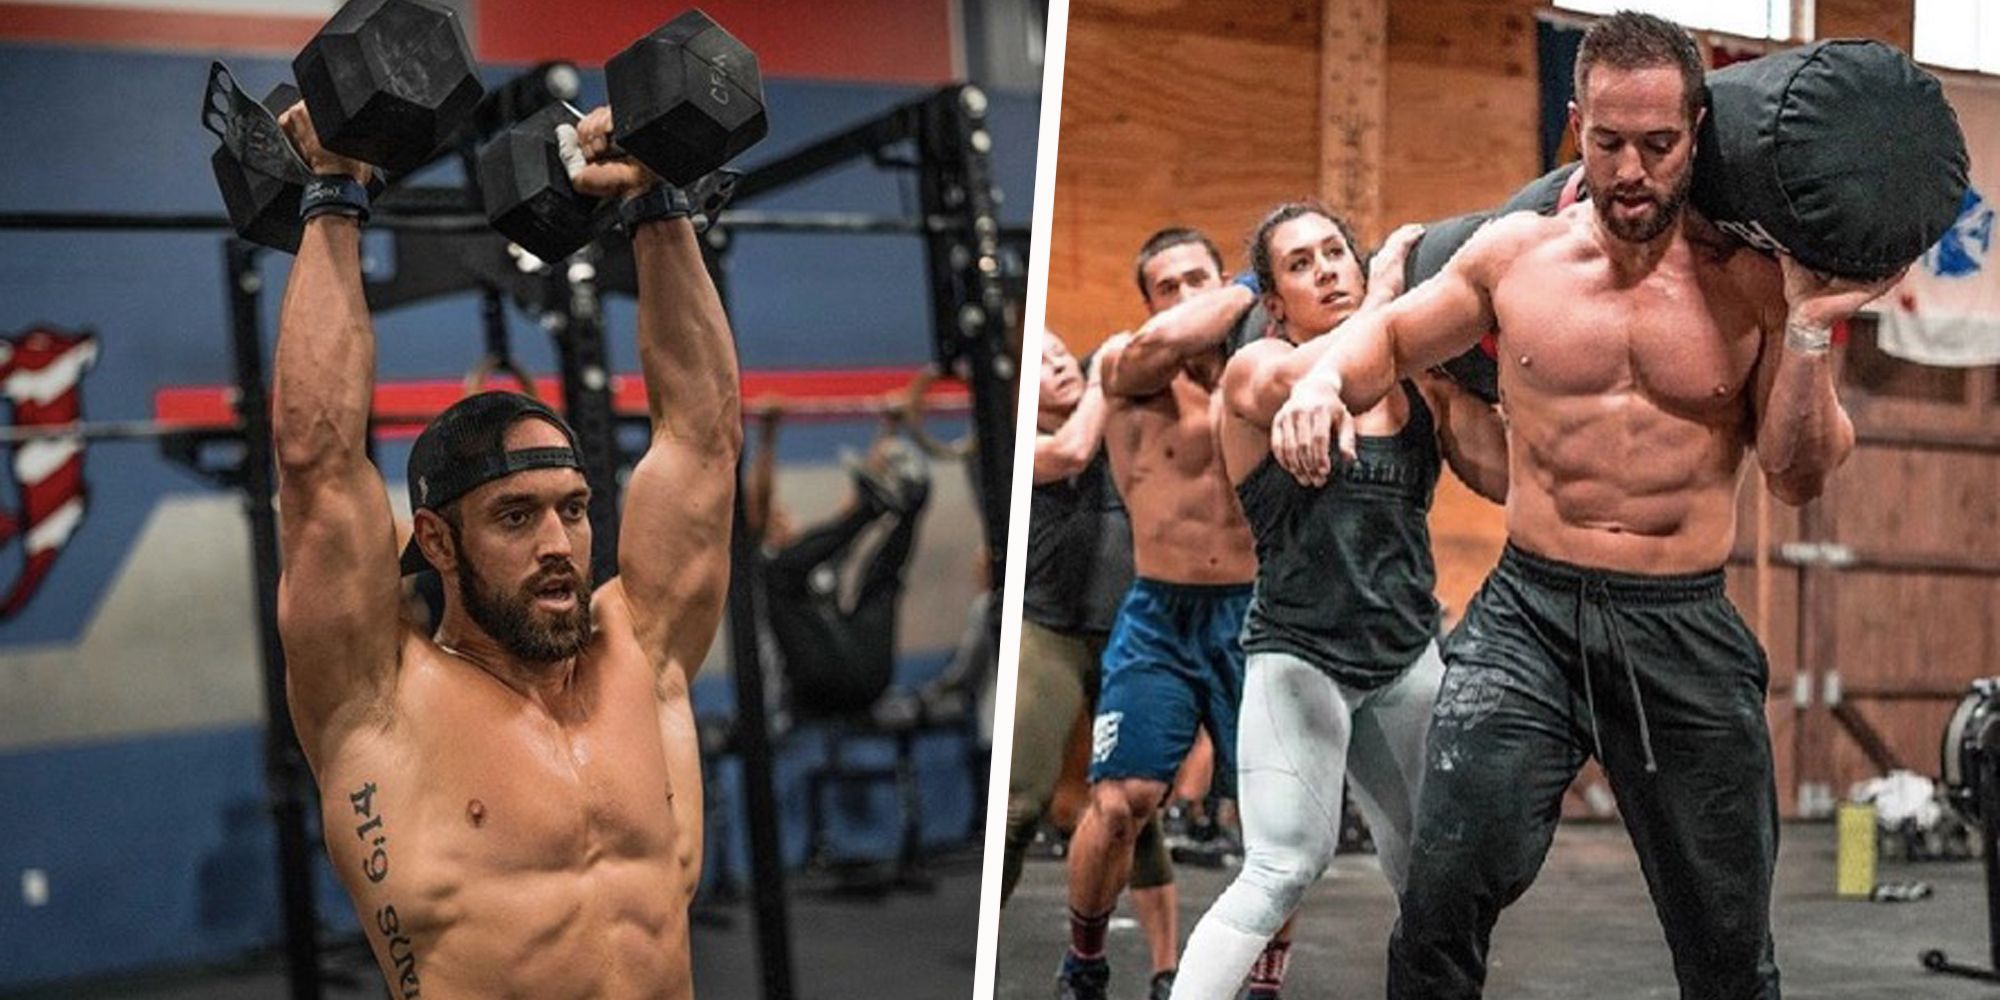 17 Brutal Upper Body Workouts for CrossFit Athletes and Fitness